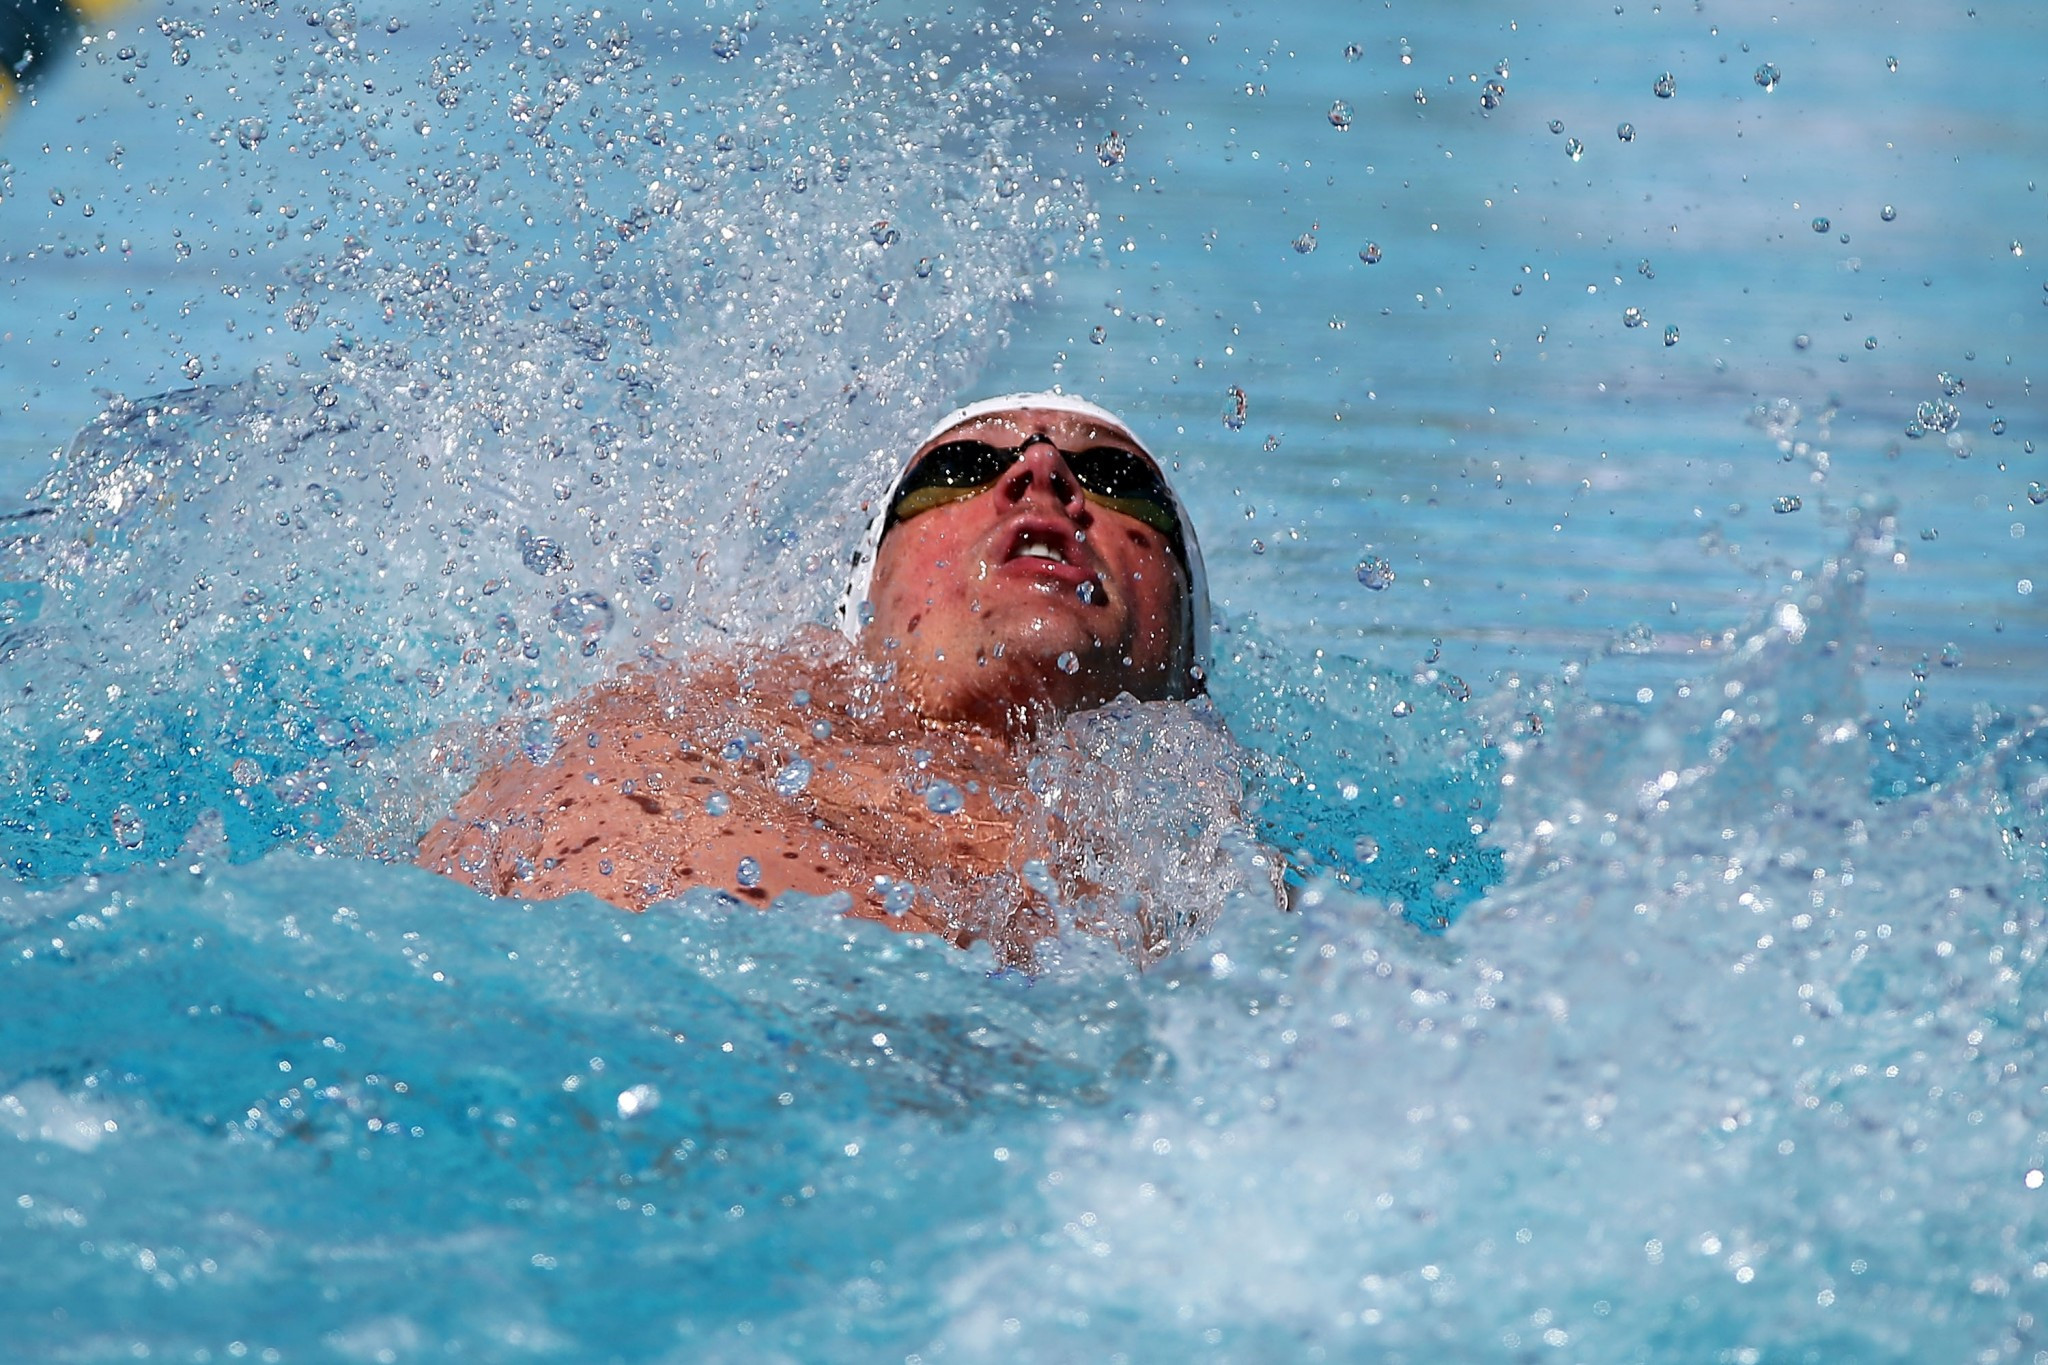 Lochte finishes fifth on return to competitive swimming